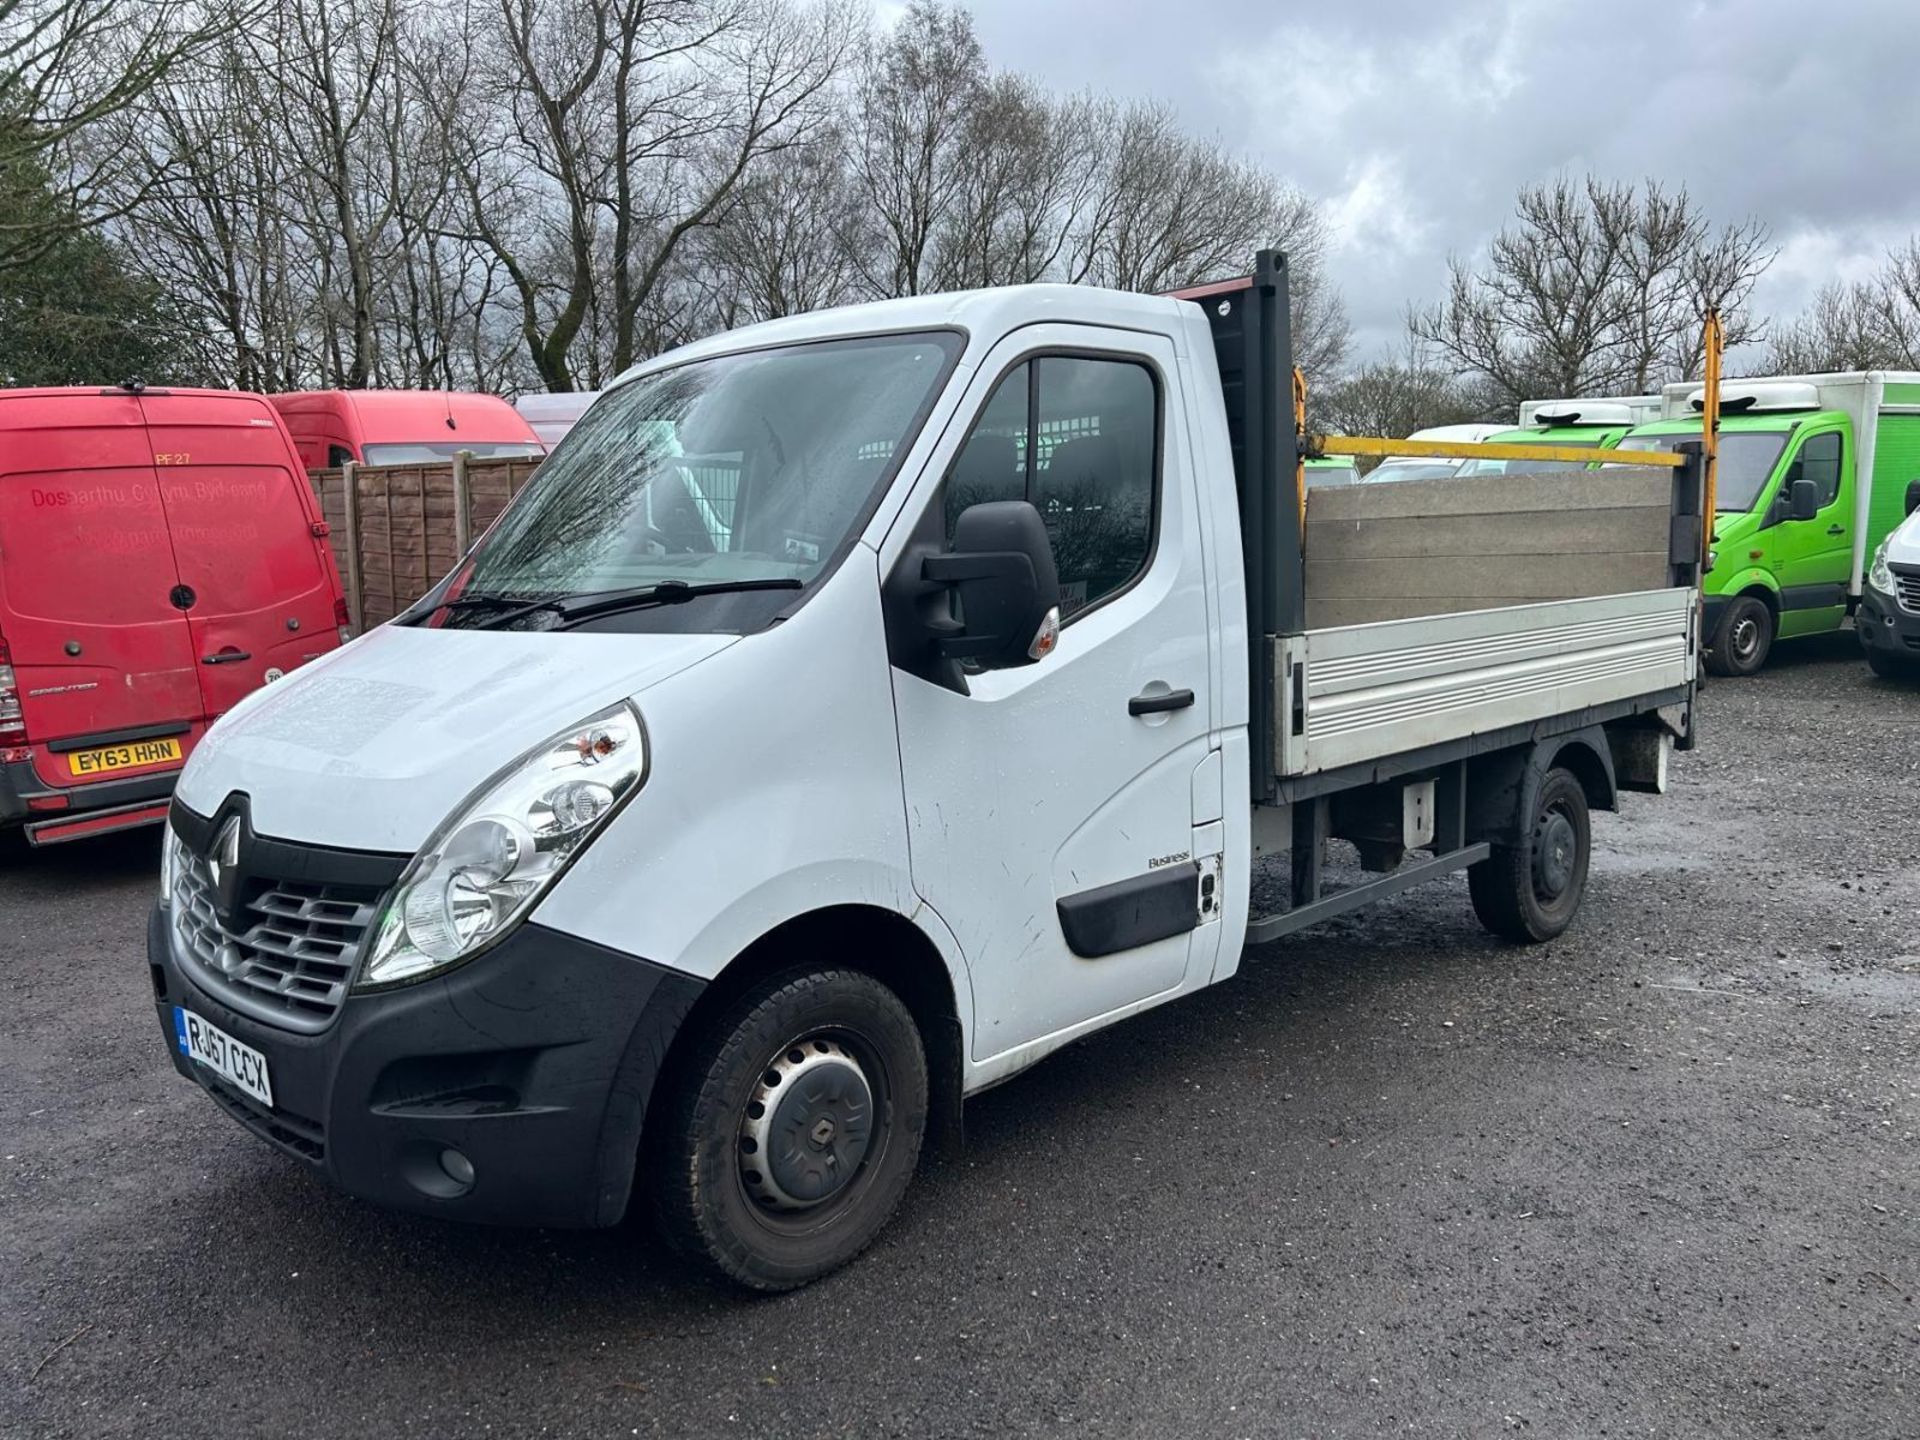 >>>SPECIAL CLEARANCE<<< 2018 RENAULT MASTER ML35 BUSINESS DCI 125 L2H1 MWB - Image 2 of 13